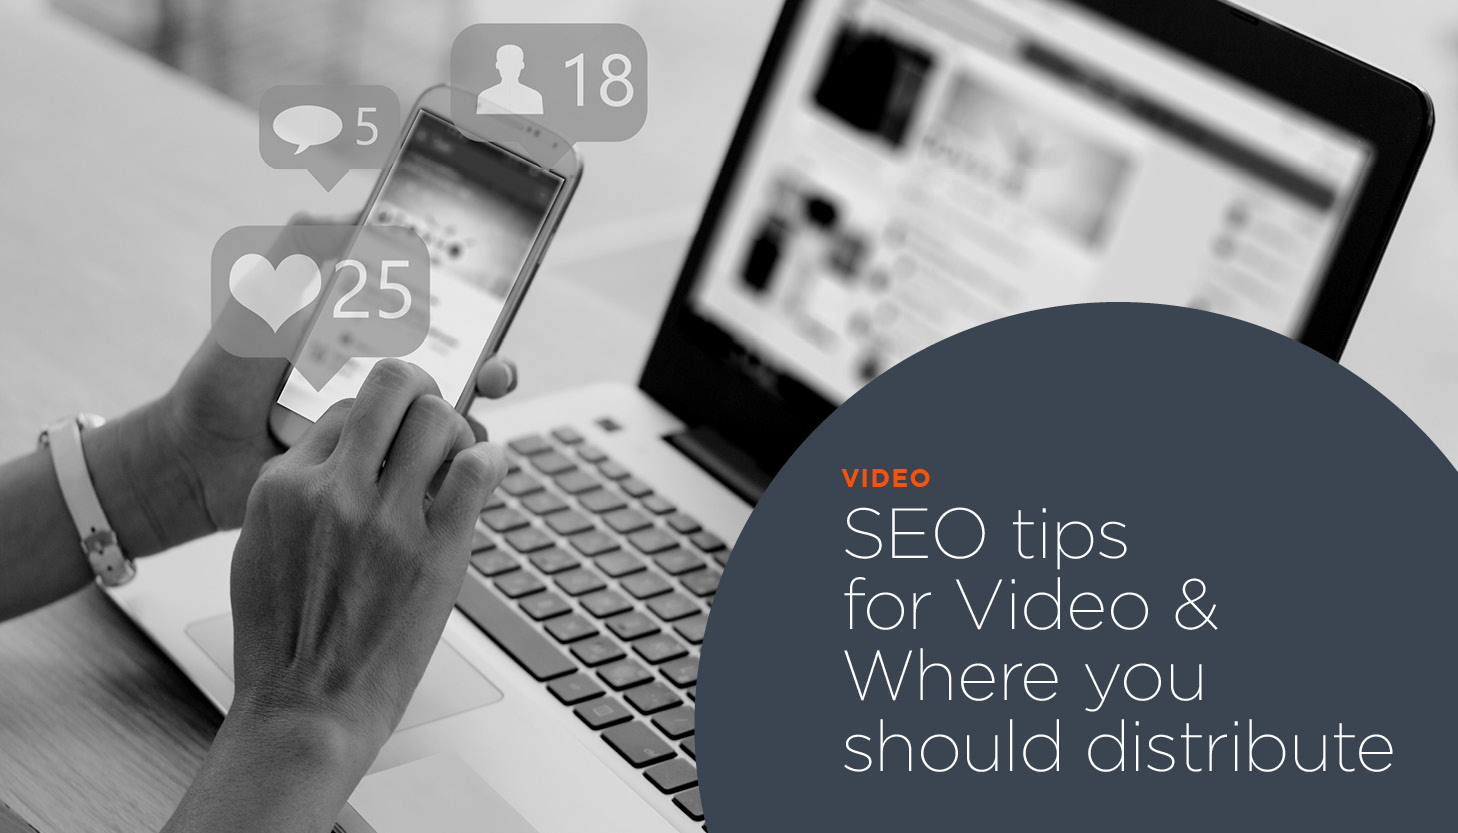 SEO tips for video + Where you should distribute